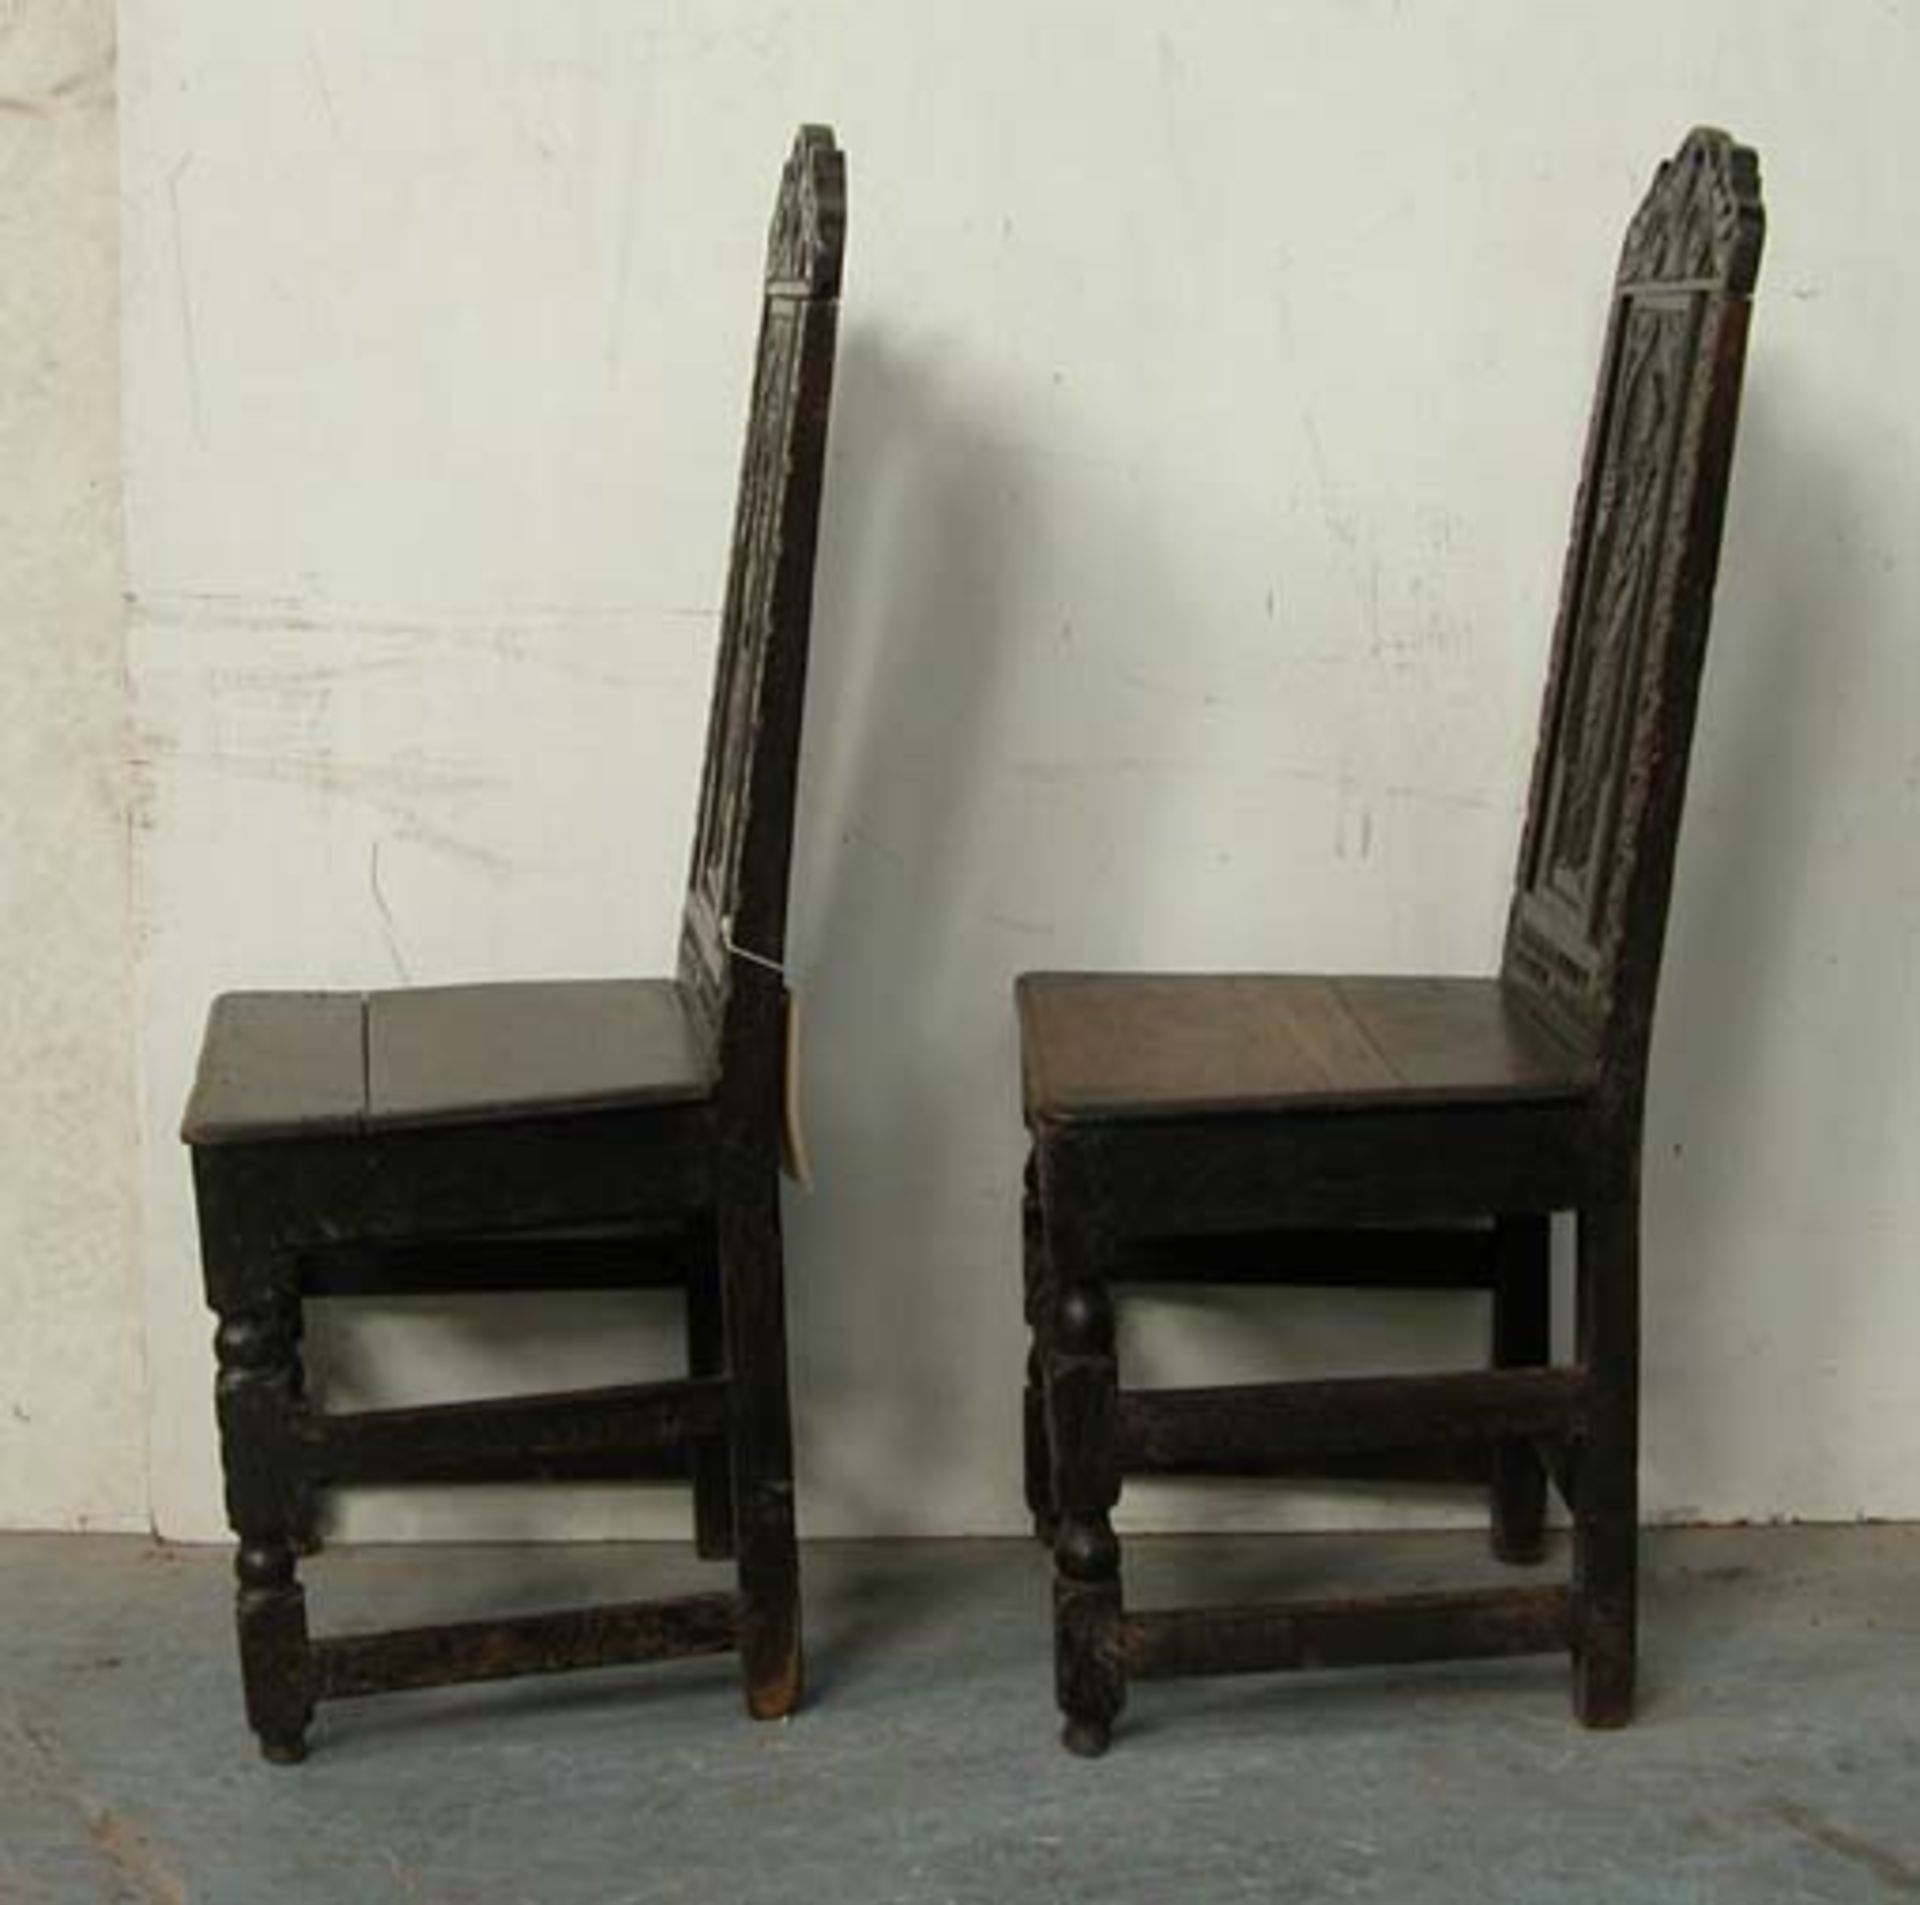 *PAIR OF OAK CHAIRS WITH CARVED MEDIEVAL FIGURES, LATE VICTORIAN. HEIGHT 1055MM (41.5IN) X WIDTH - Image 6 of 6